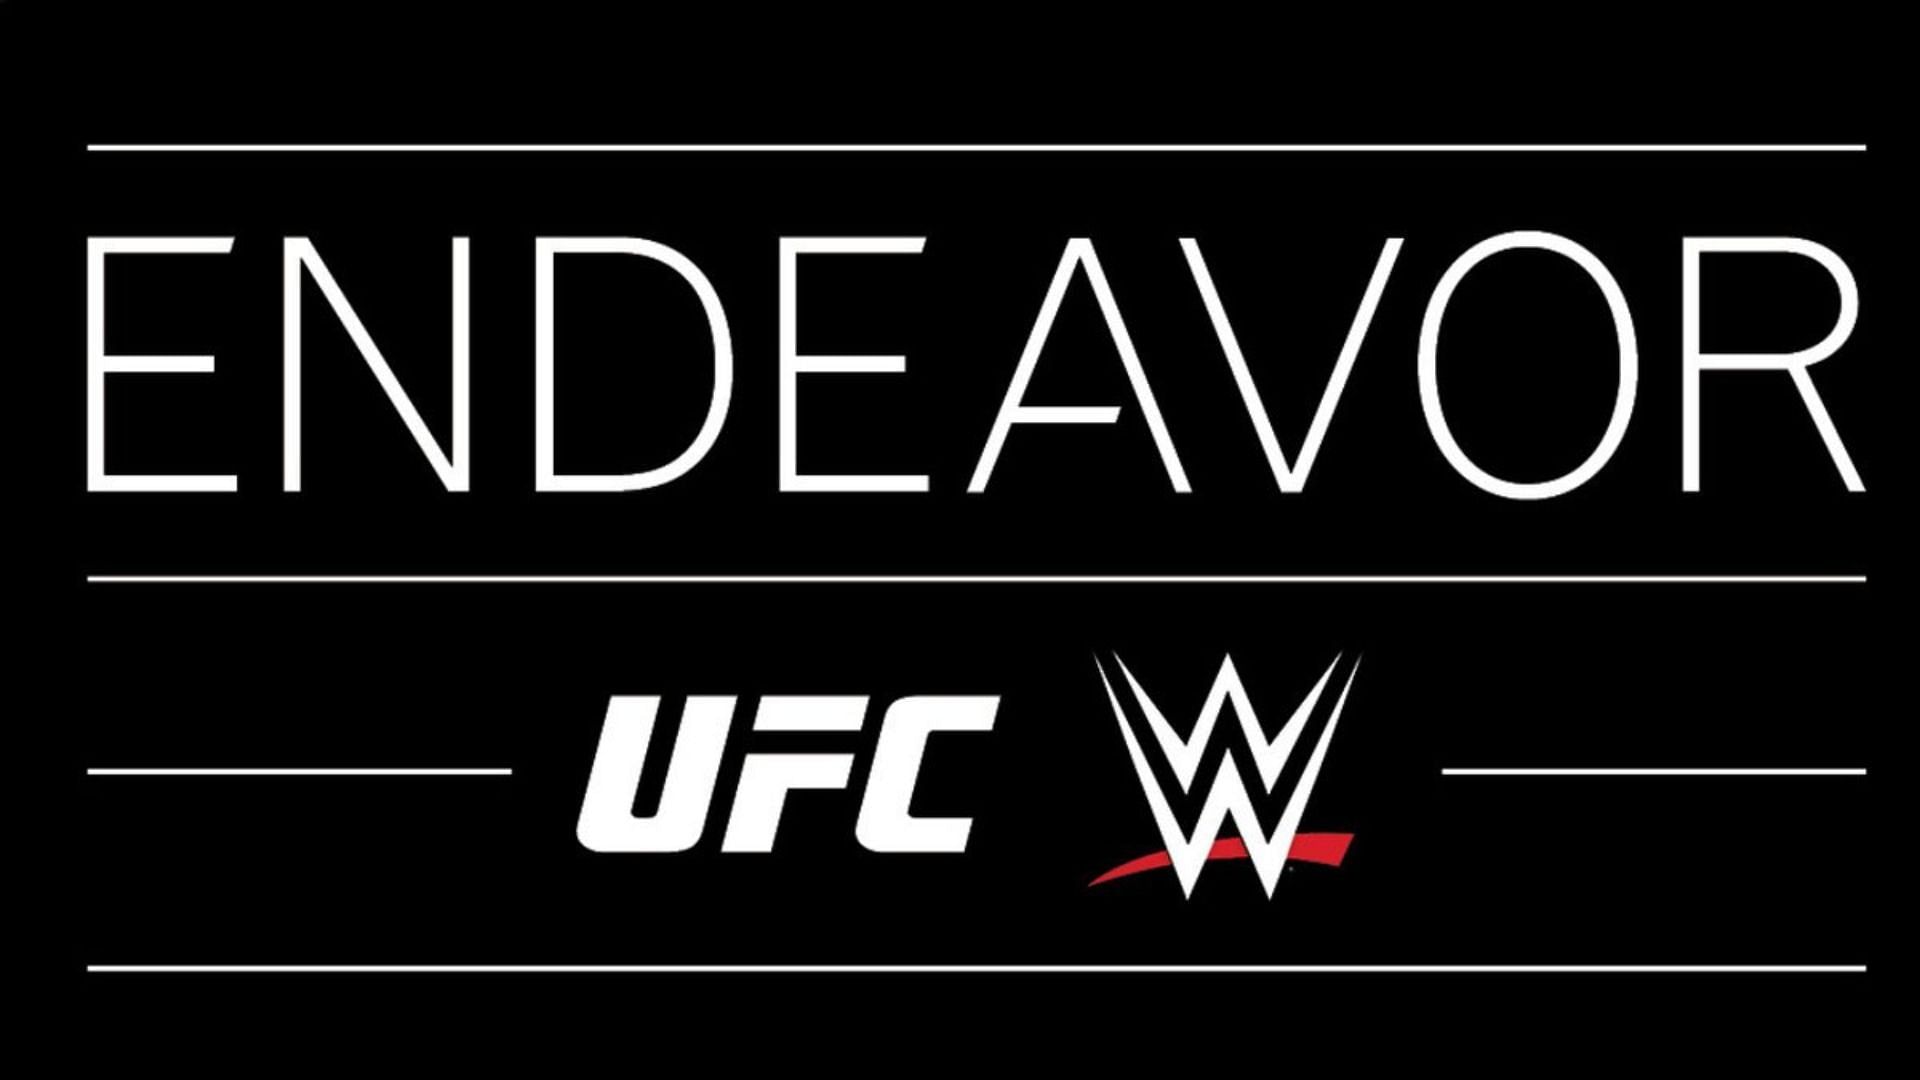 Endeavor made a deal to merge with WWE!